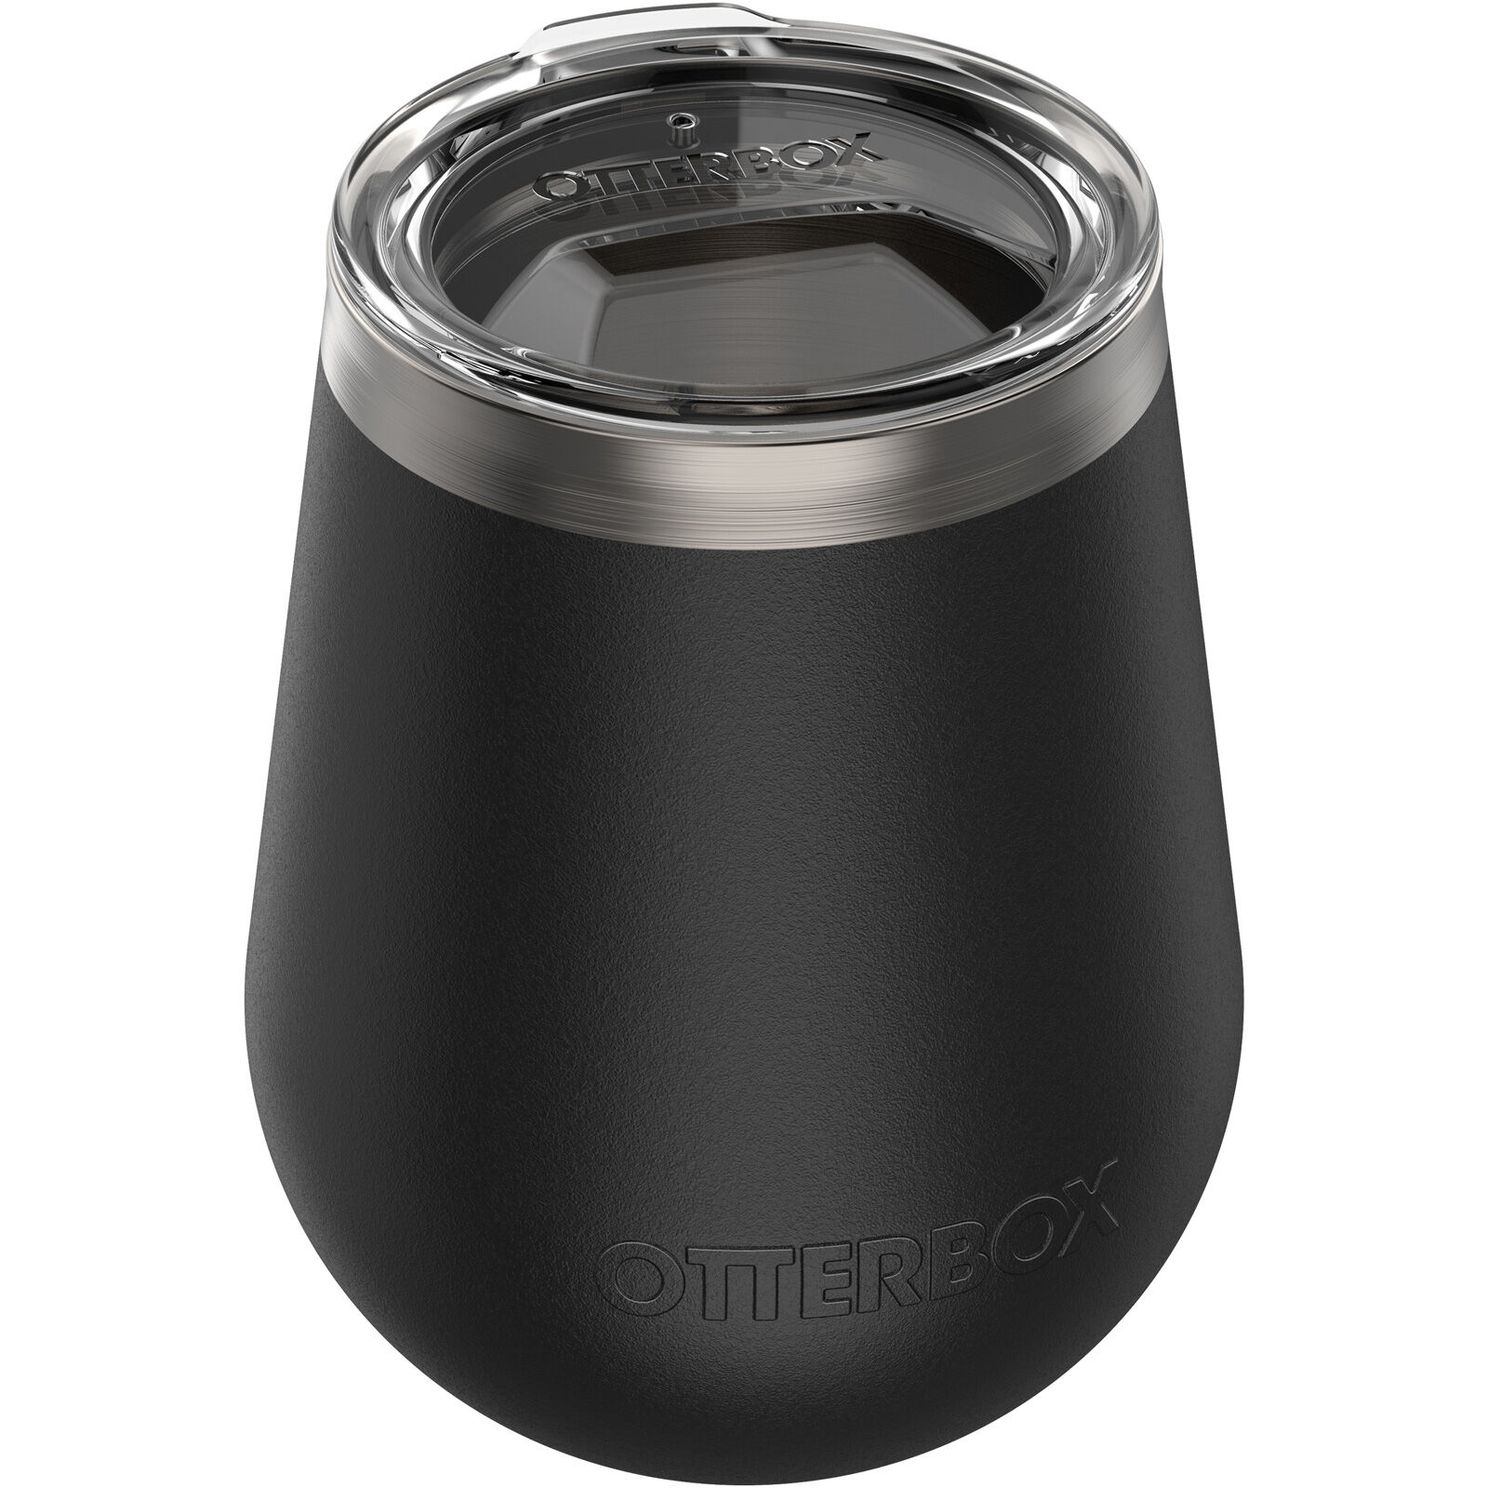 AW Summervibes Day 15, win the Otterbox power bank and Wine Tumbler